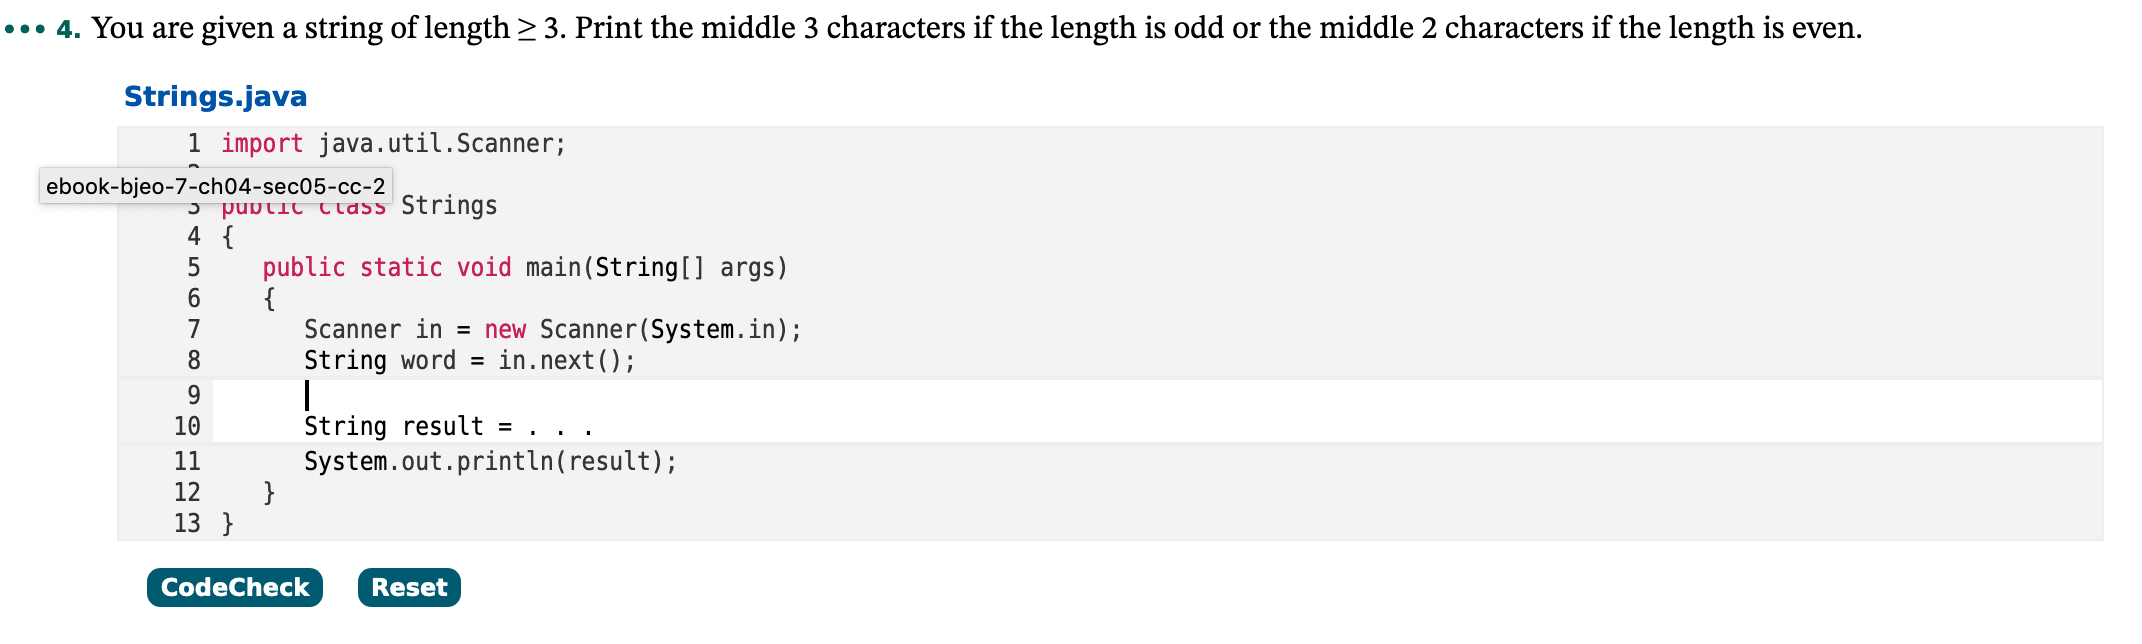 ... 4. You are given a string of length > 3. Print the middle 3 characters if the length is odd or the middle 2 characters if the length is even.
Strings.java
1 import java.util.Scanner;
ebook-bjeo-7-ch04-sec05-cc-2
5 pubtic tlass Strings
4 {
public static void main(String[] args)
{
Scanner in = new Scanner(System.in);
5
6.
in.next();
String word =
String result = . . .
10
System.out.println(result);
}
11
12
13 }
CodeCheck
Reset
